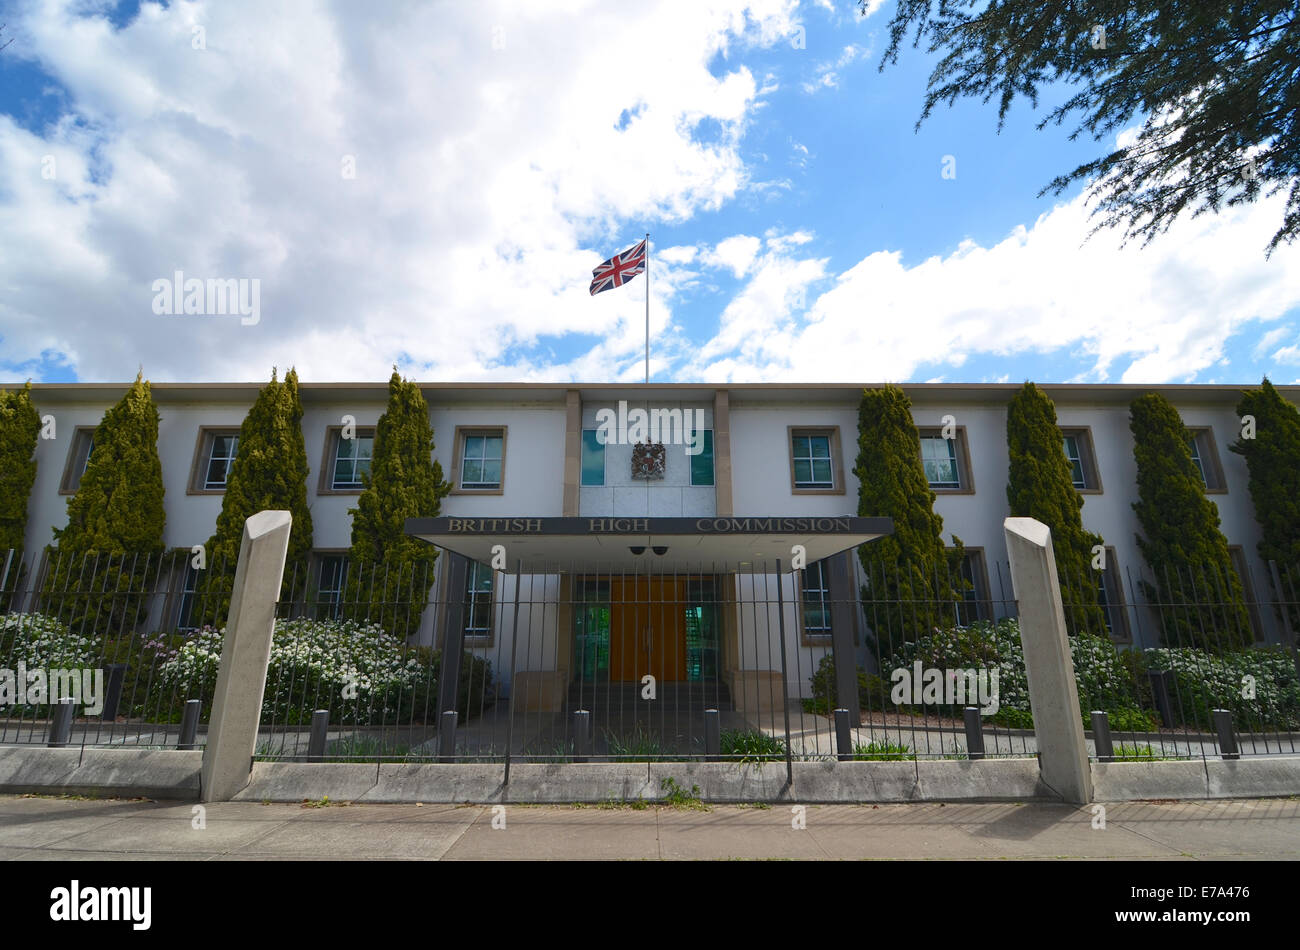 The British High Commission, flying the union flag, in Canberra, Australia Stock Photo